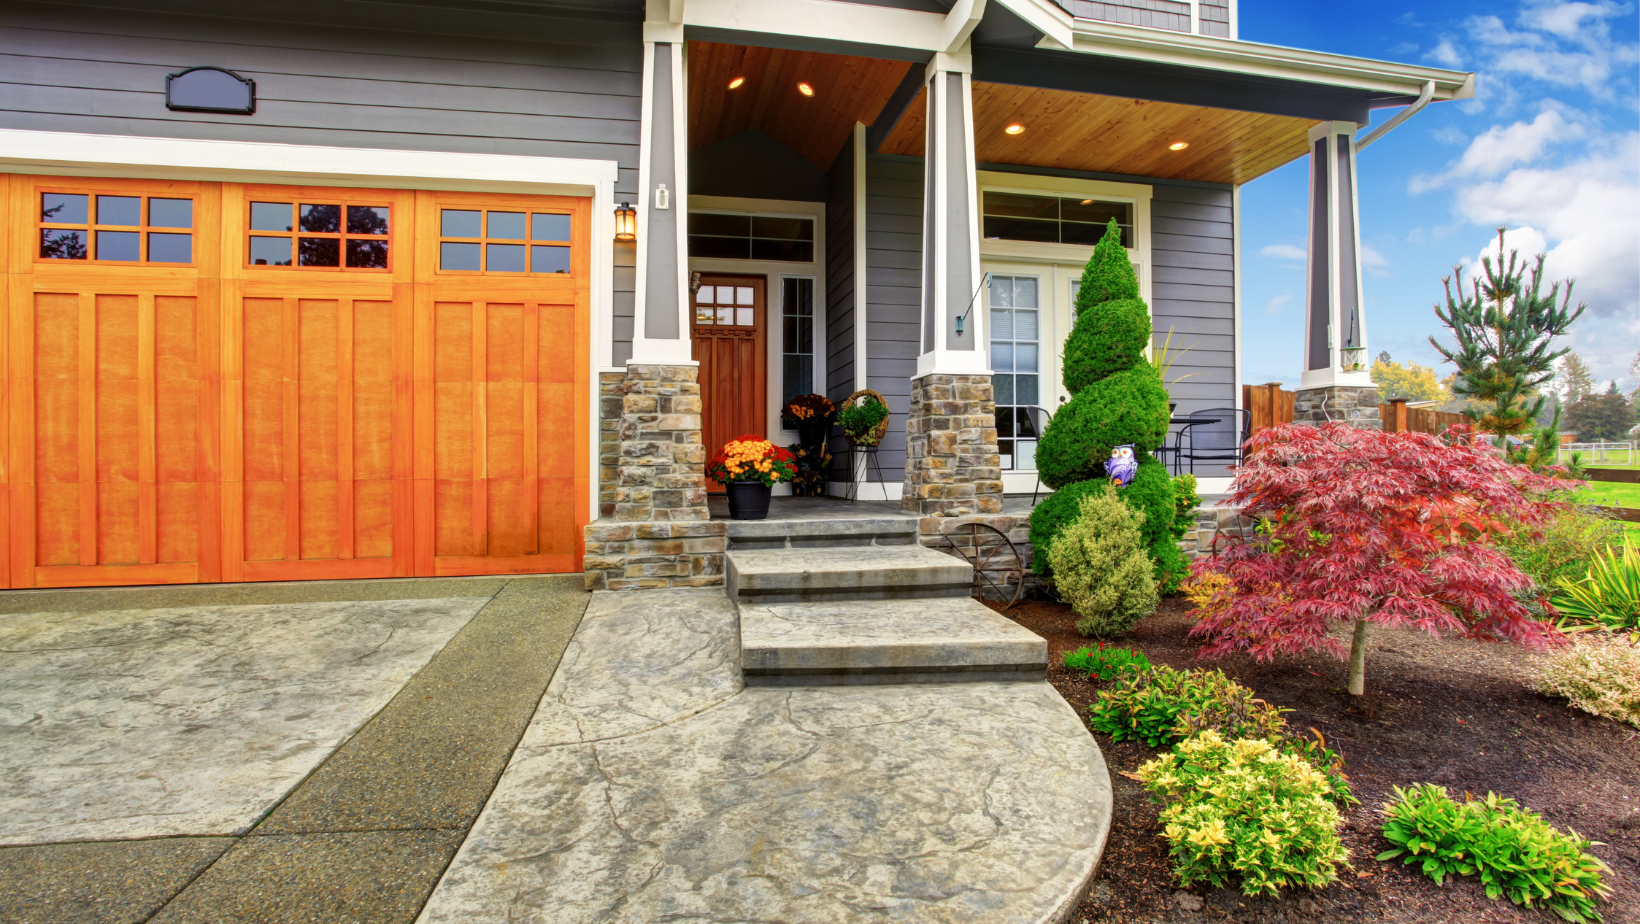 A Vermont home with well-maintained landscaping, a wooden garage door, and a stone pathway.  